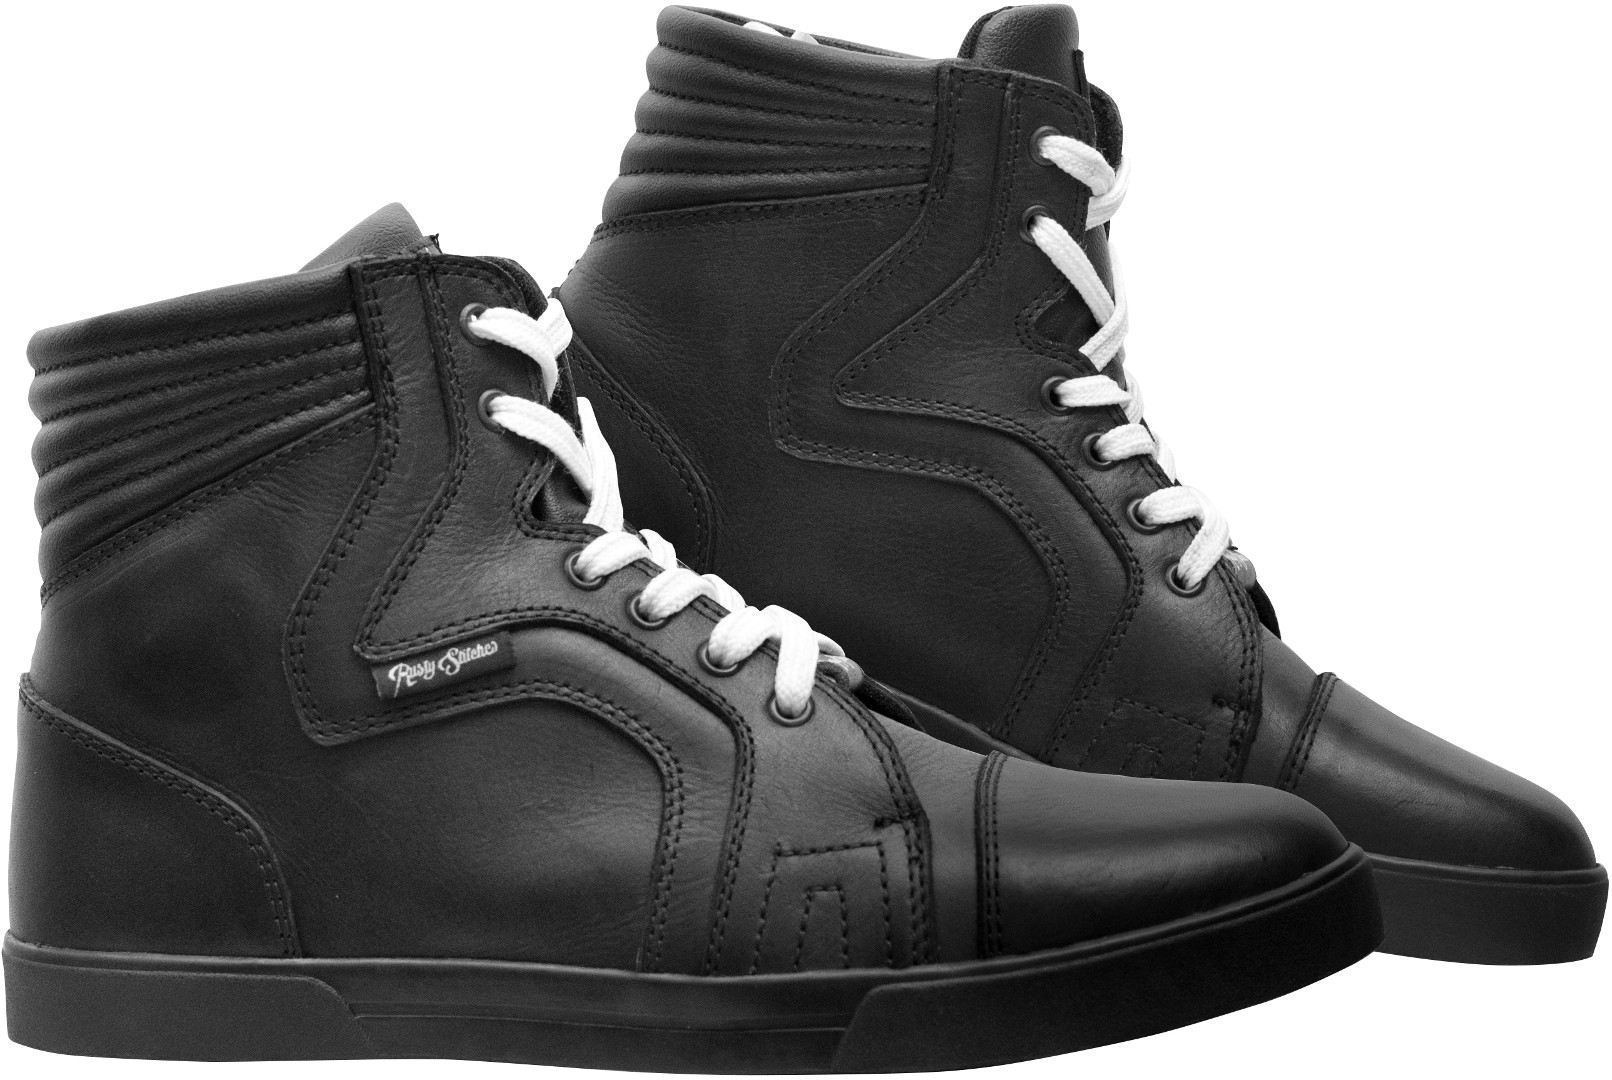 Image of Rusty Stitches Franky Chaussures de moto Noir 41